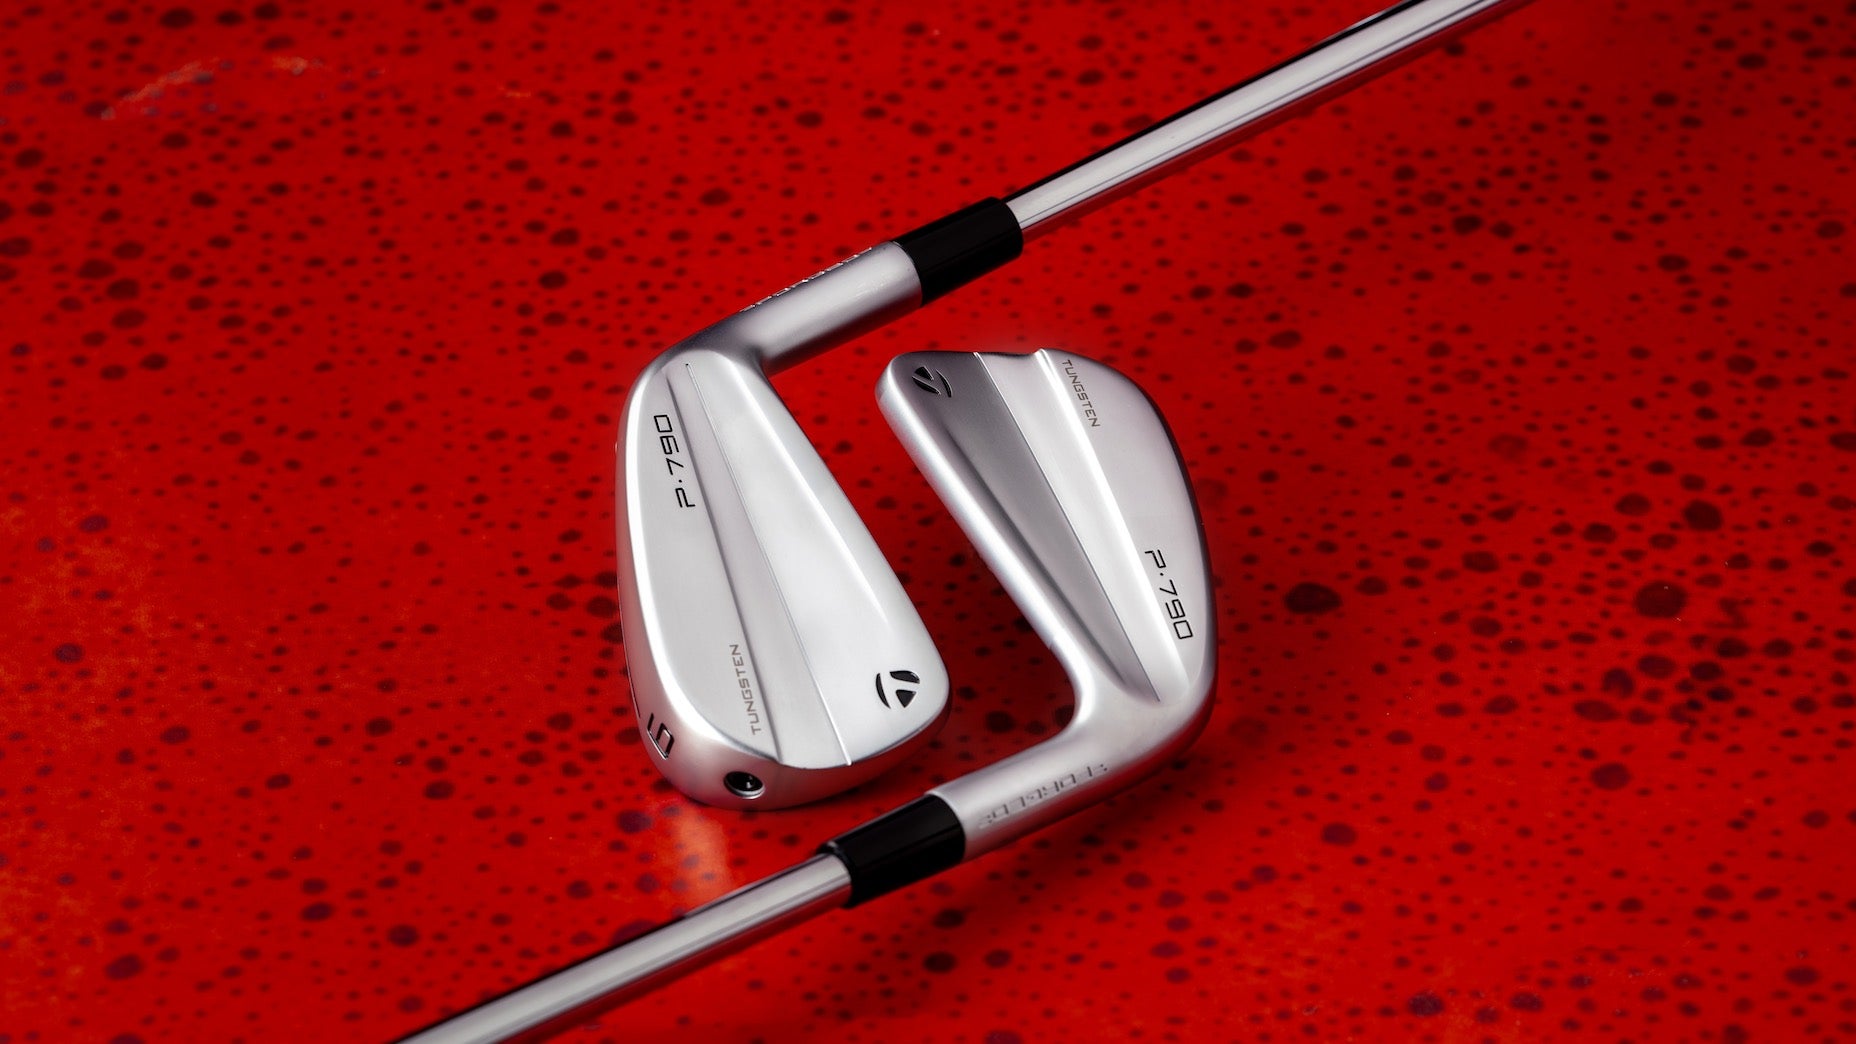 TaylorMade's all-new P790 irons: 5 things you need to know